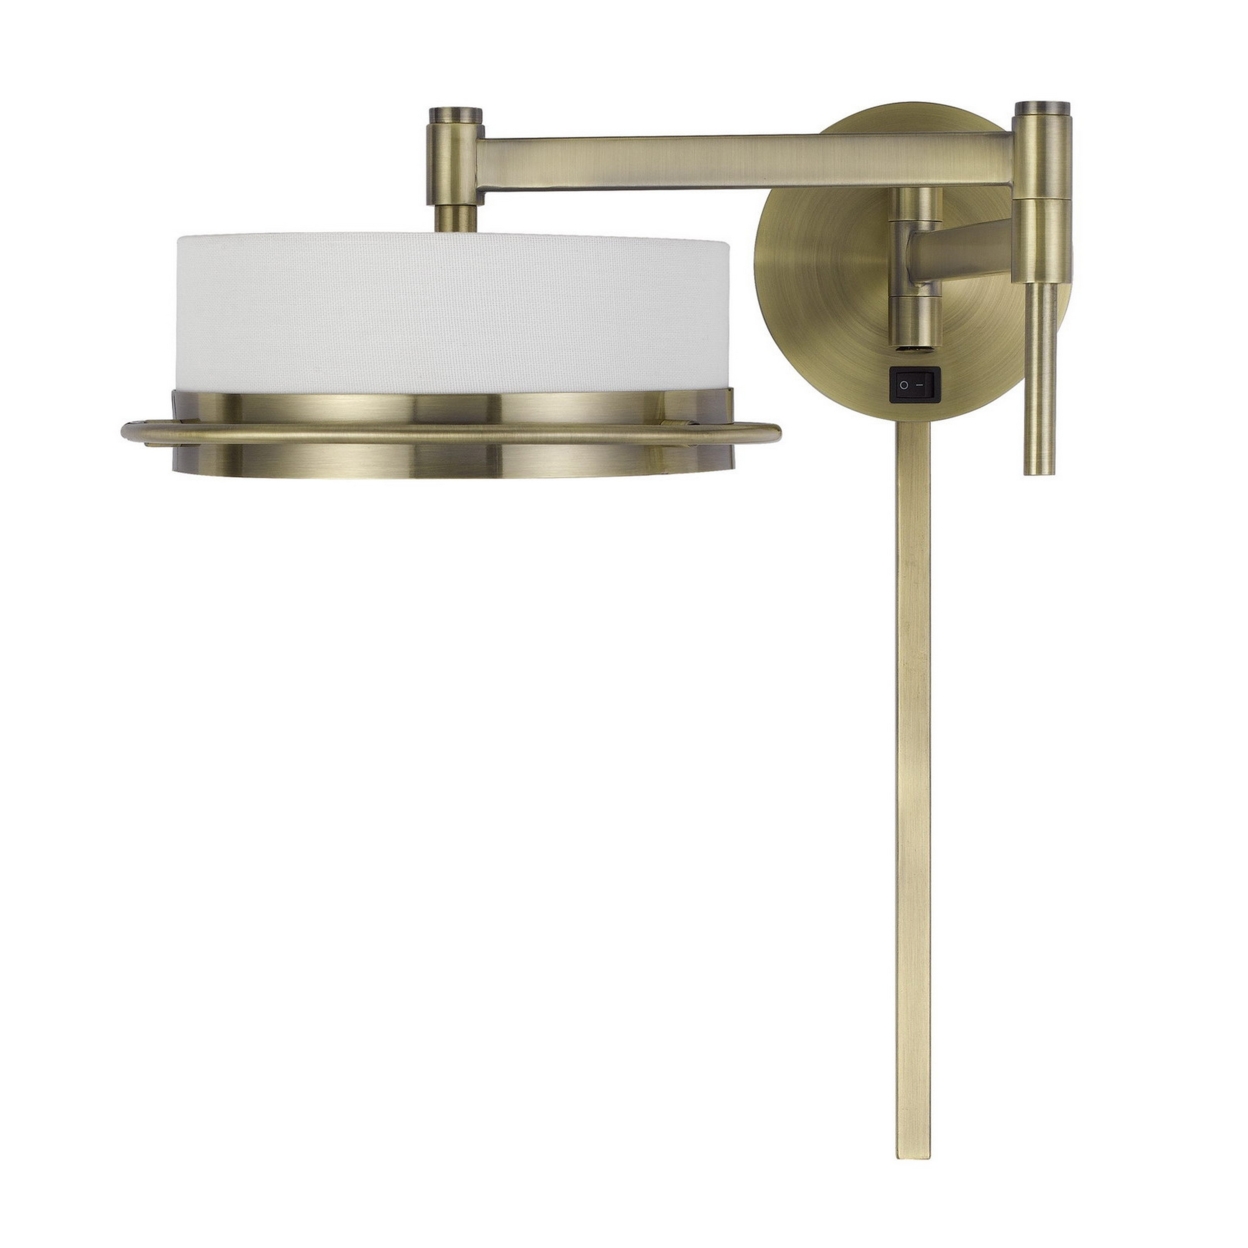 21 Inch Modern Wall Lamp With Swing Arm, Integrated LED, White Shade, Brass- Saltoro Sherpi